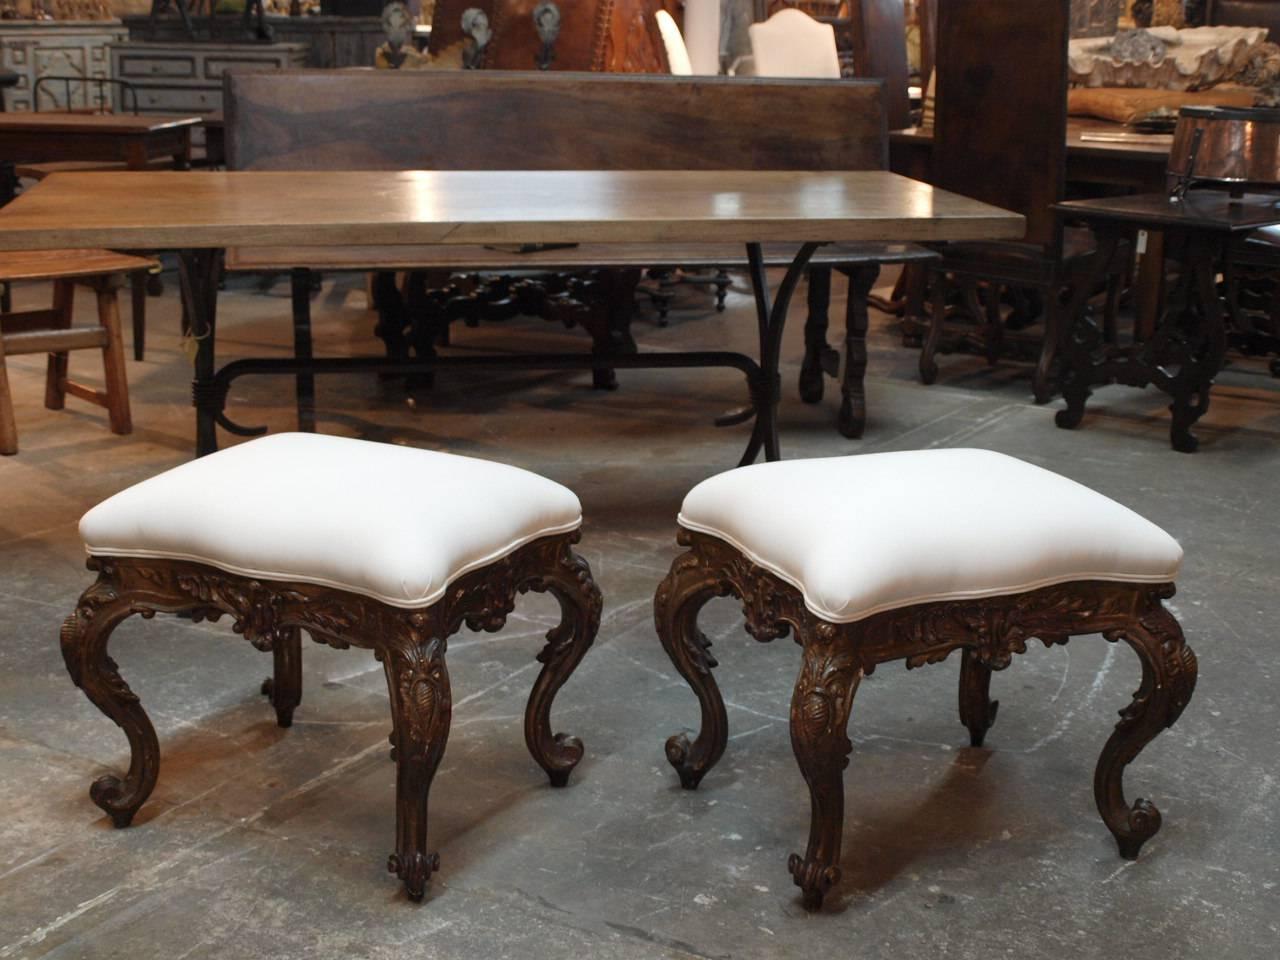 A stunning pair of late 19th century Italian Louis XV style stools in polychromed wood. Recently reupholstered.